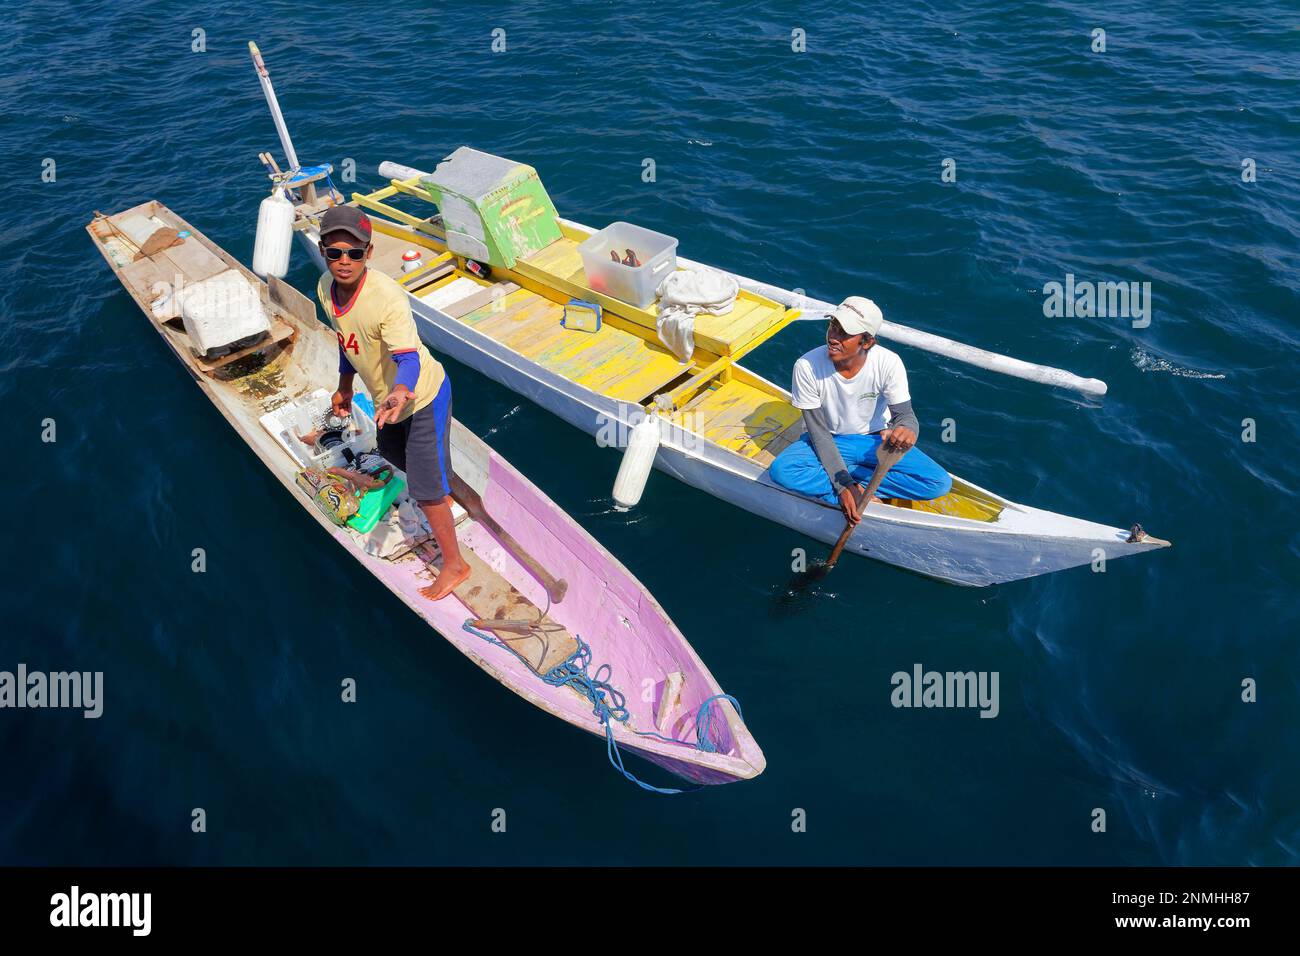 Two men, Indonesian, young, with boat on sea, colourful, offering souvenirs, handicraft, handicrafts, Komodo National Park, Unesco World Heritage Stock Photo